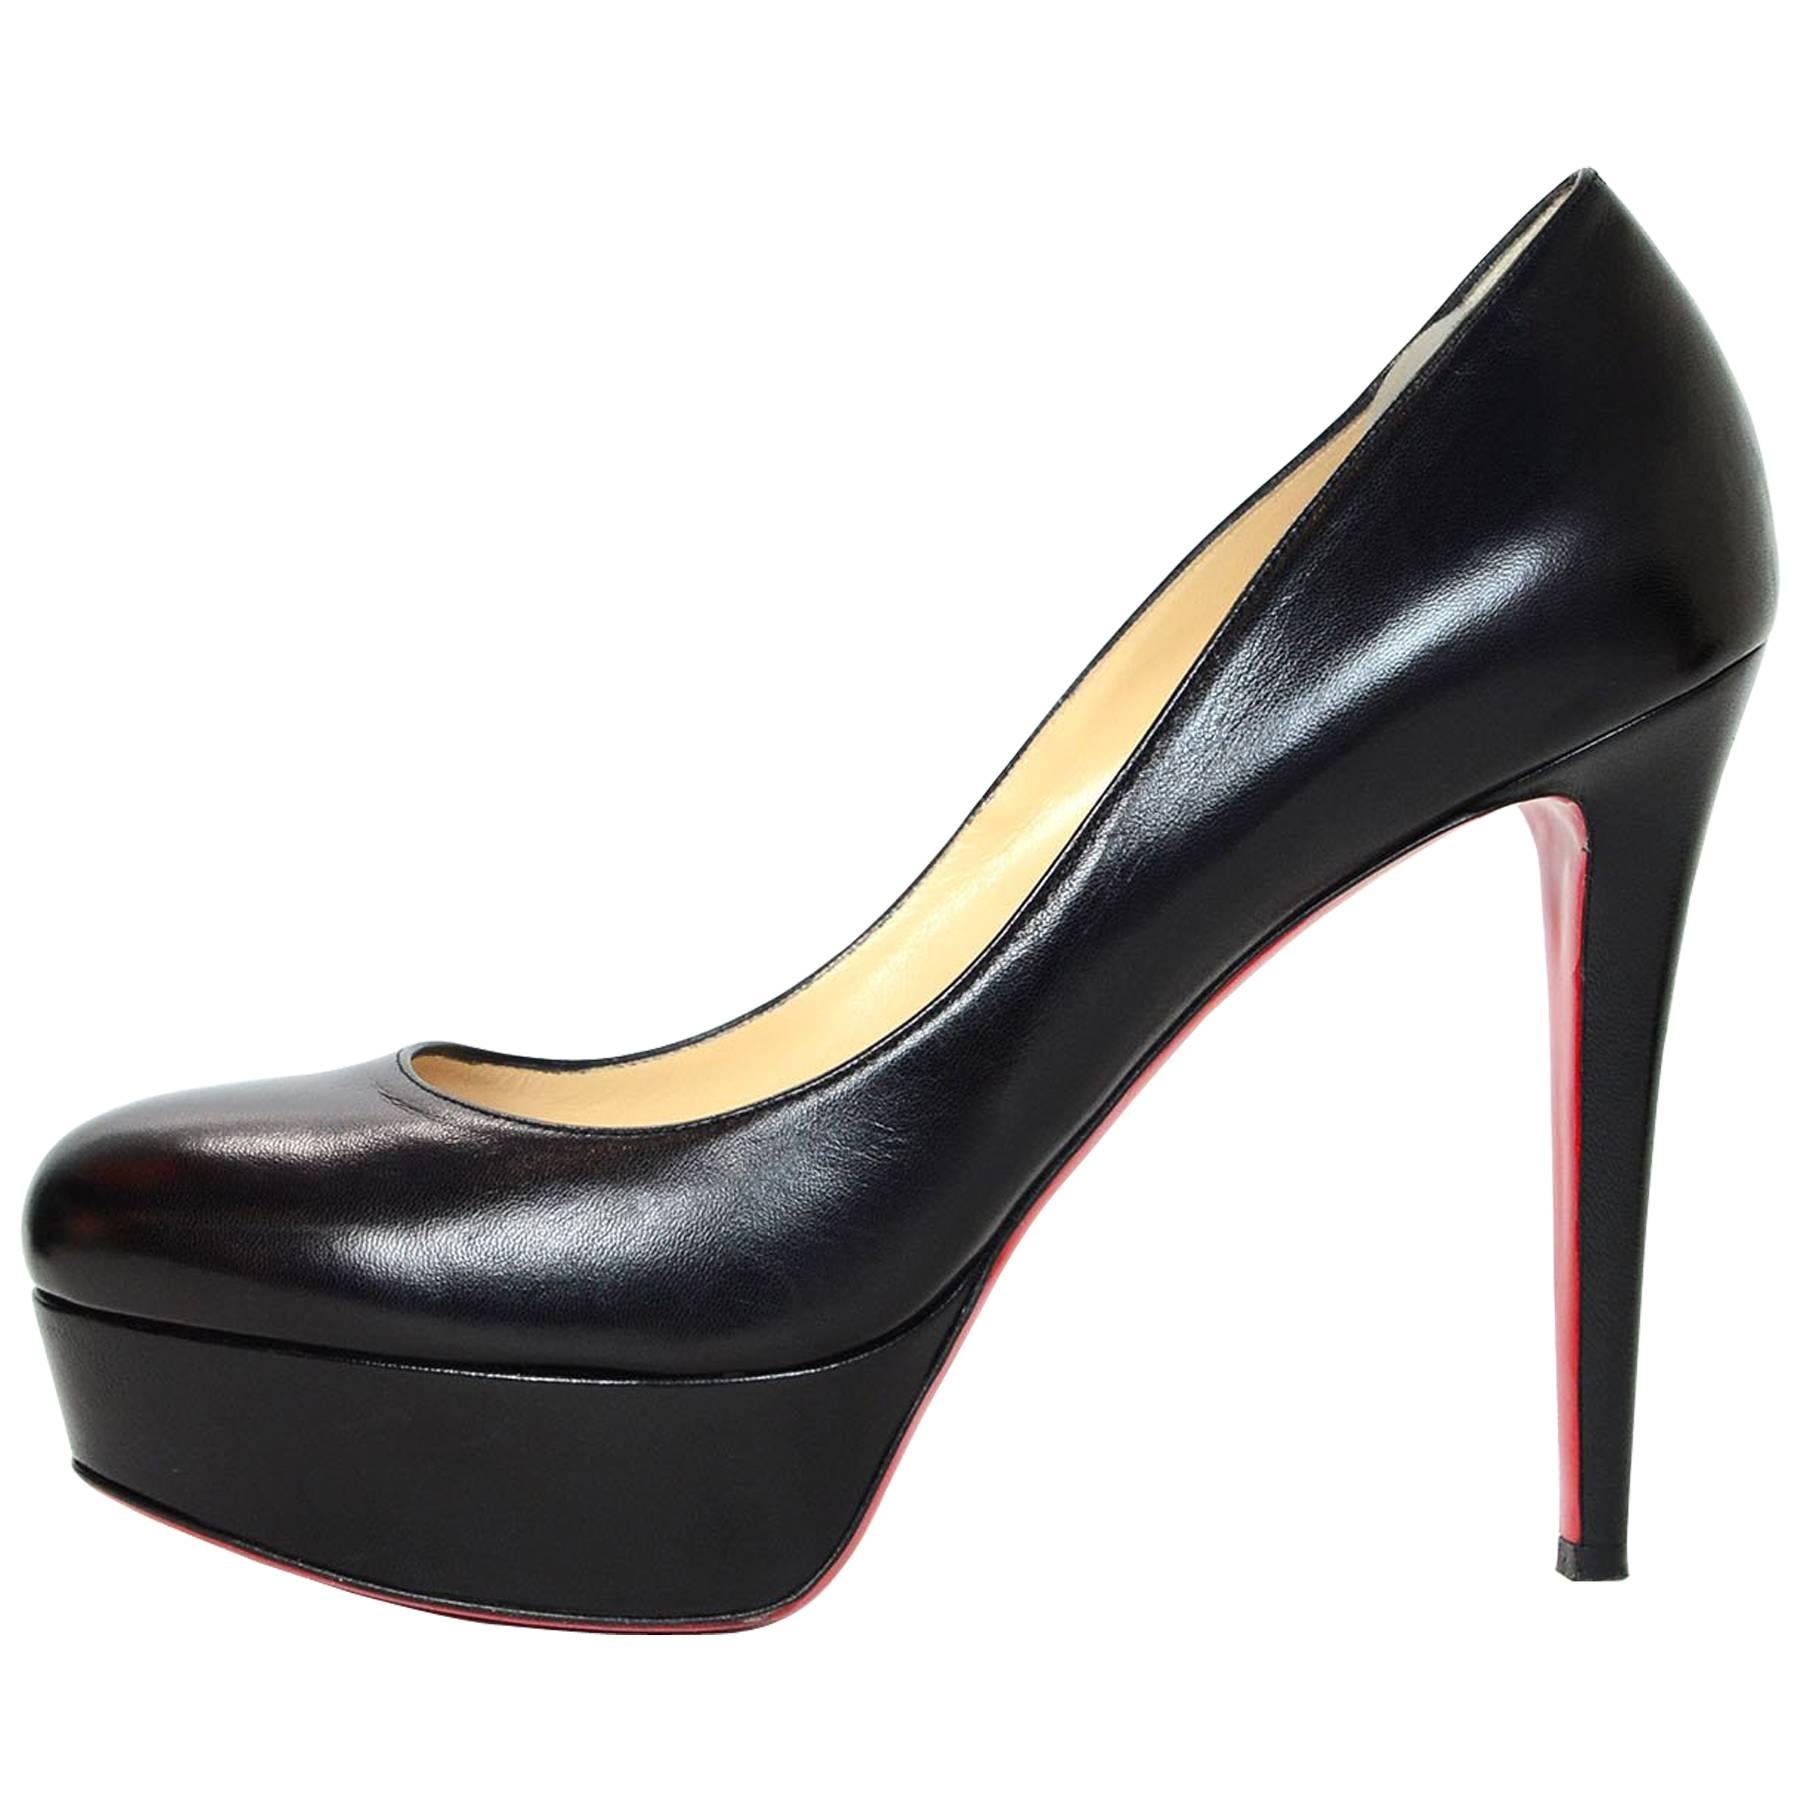 Christian Louboutin Black Leather Bianca 140mm Pumps Sz 41 with DB